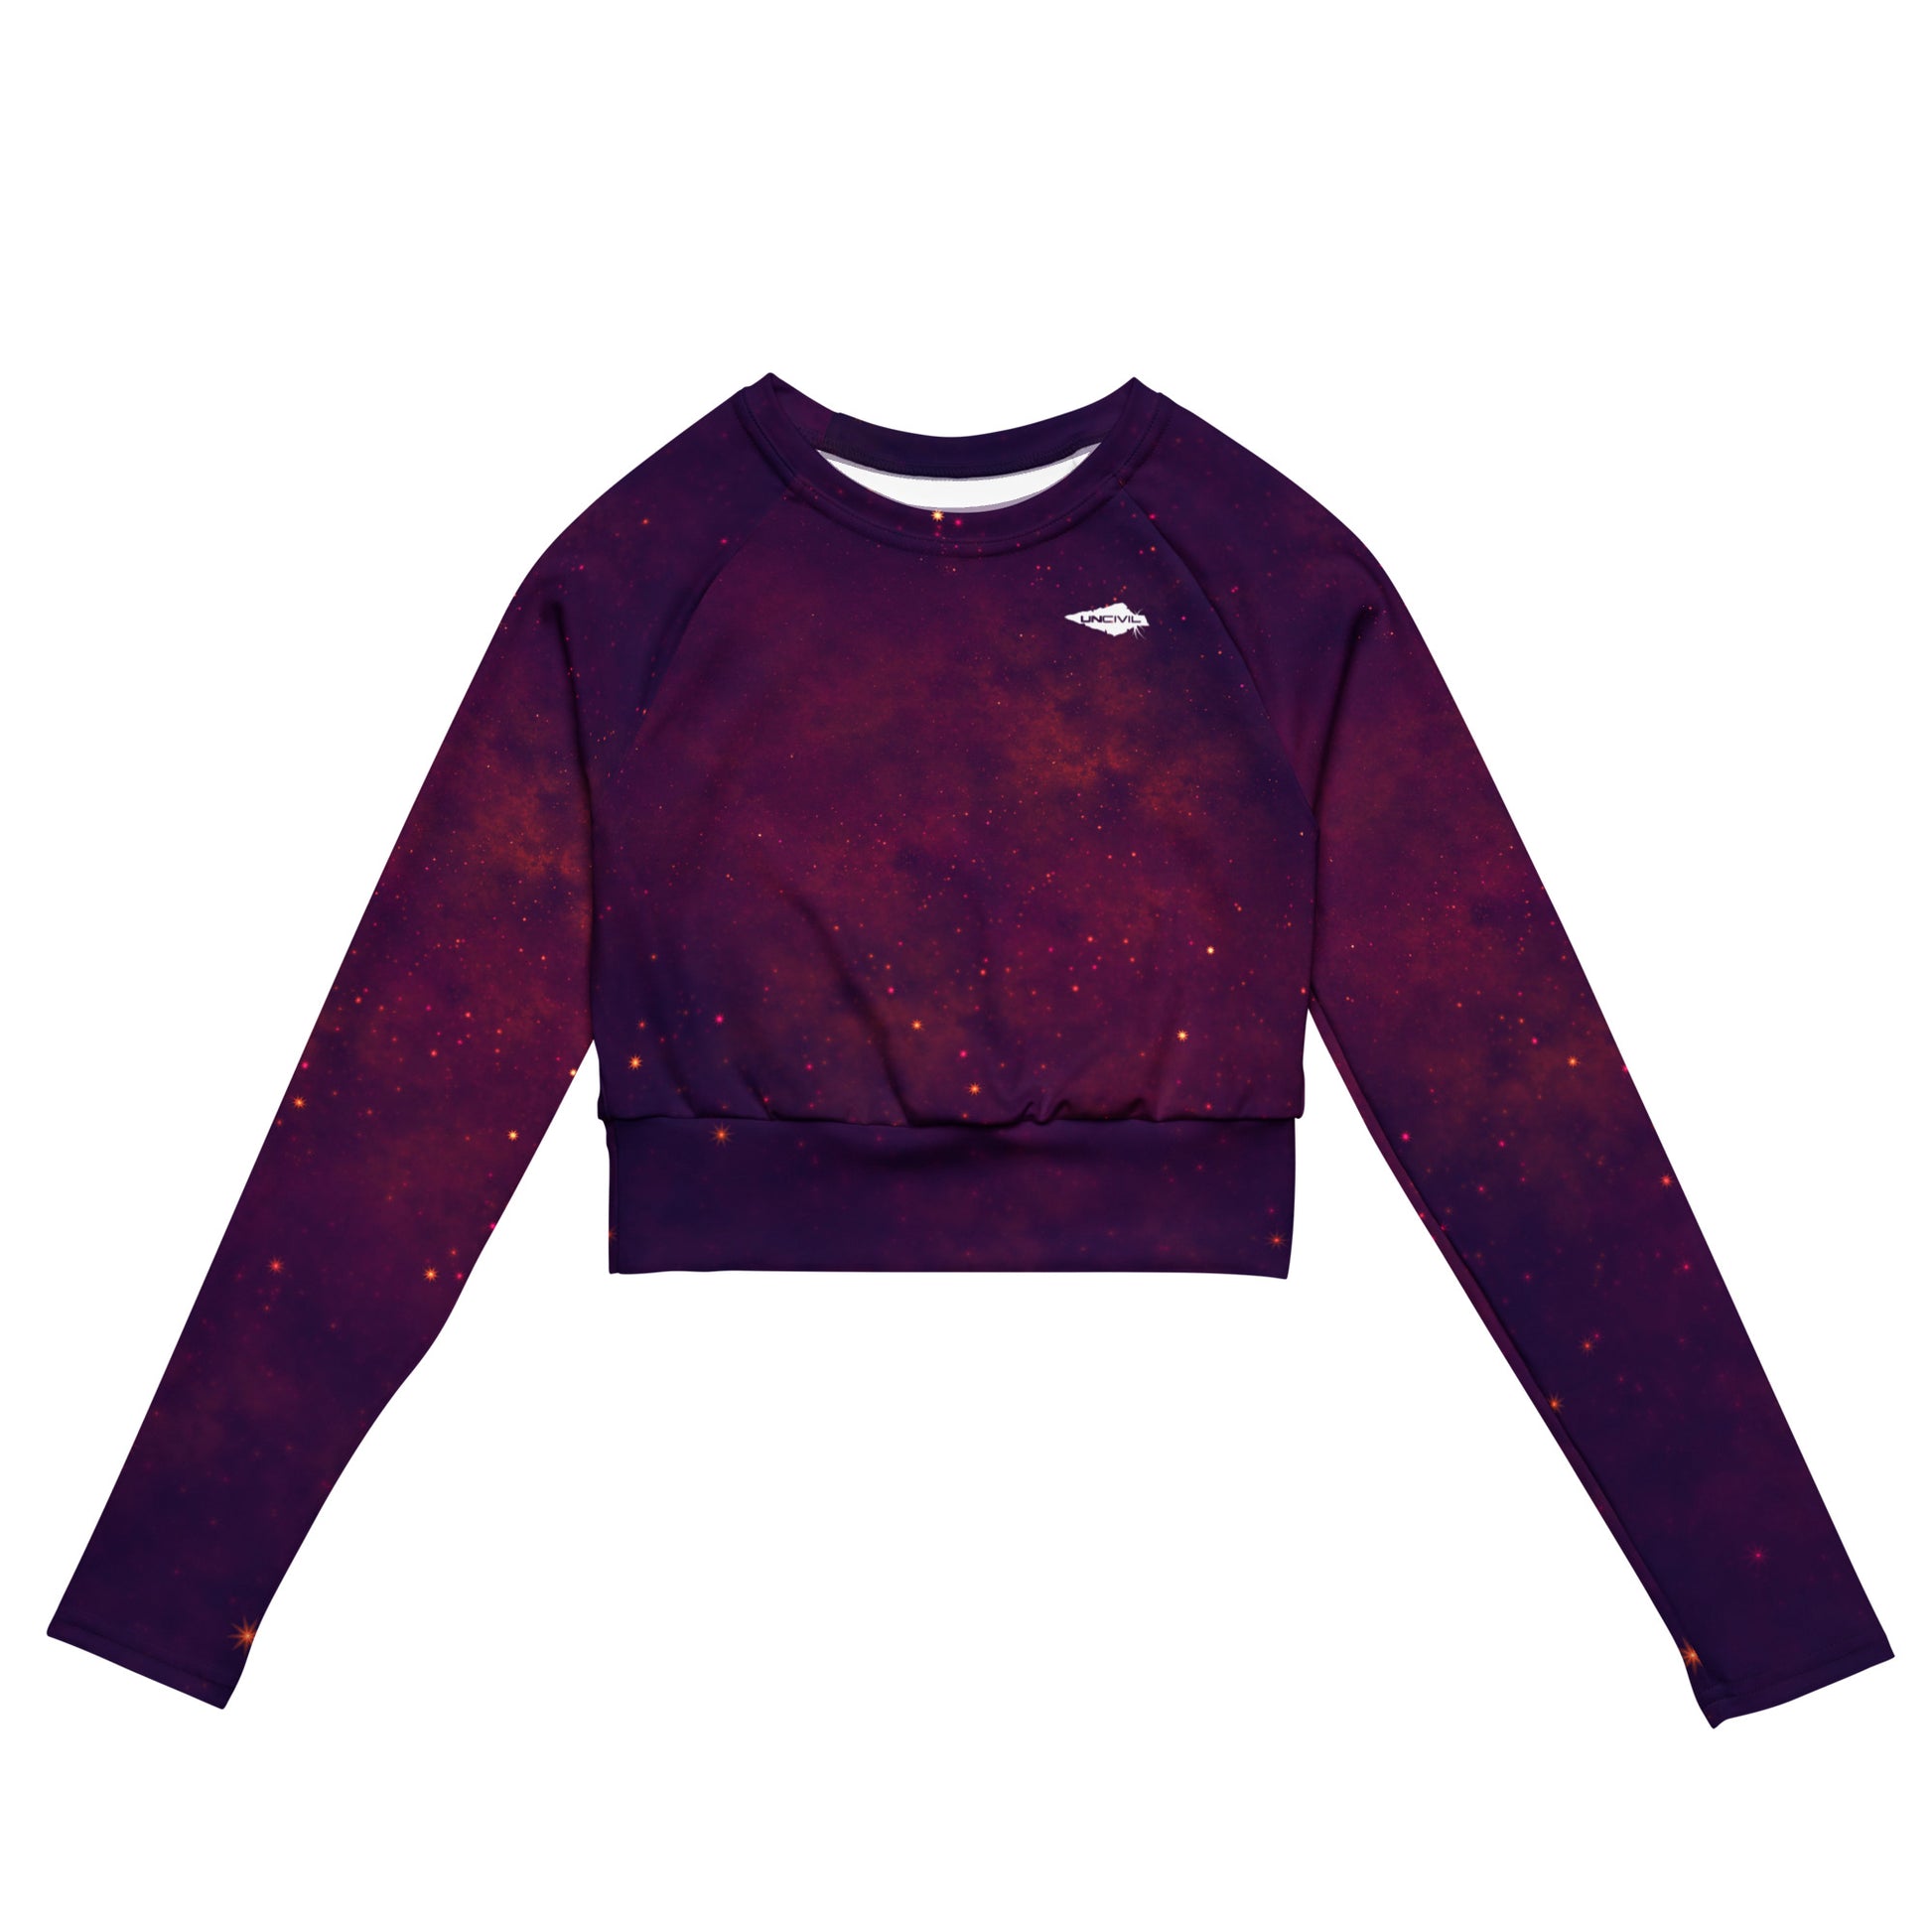 Astro long-sleeve crop top for women is made of recycled polyester and elastane, making it an eco-friendly choice for swimming, sports, or athleisure. UPF 50+.